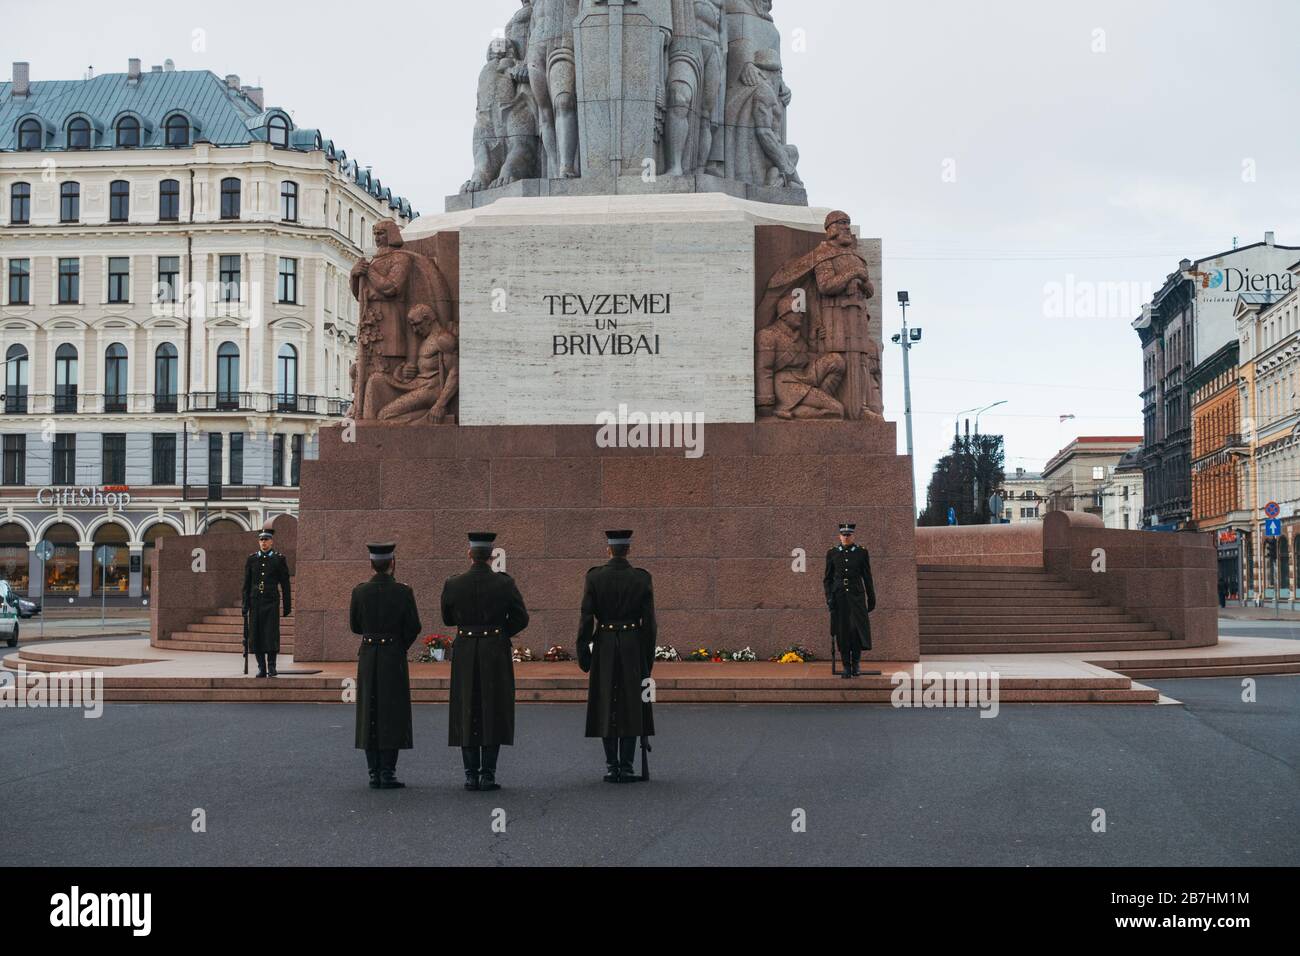 Changing of the guard at The Freedom Monument, commemorating Latvians who died fighting for their independence. It reads 'For Fatherland and Freedom' Stock Photo